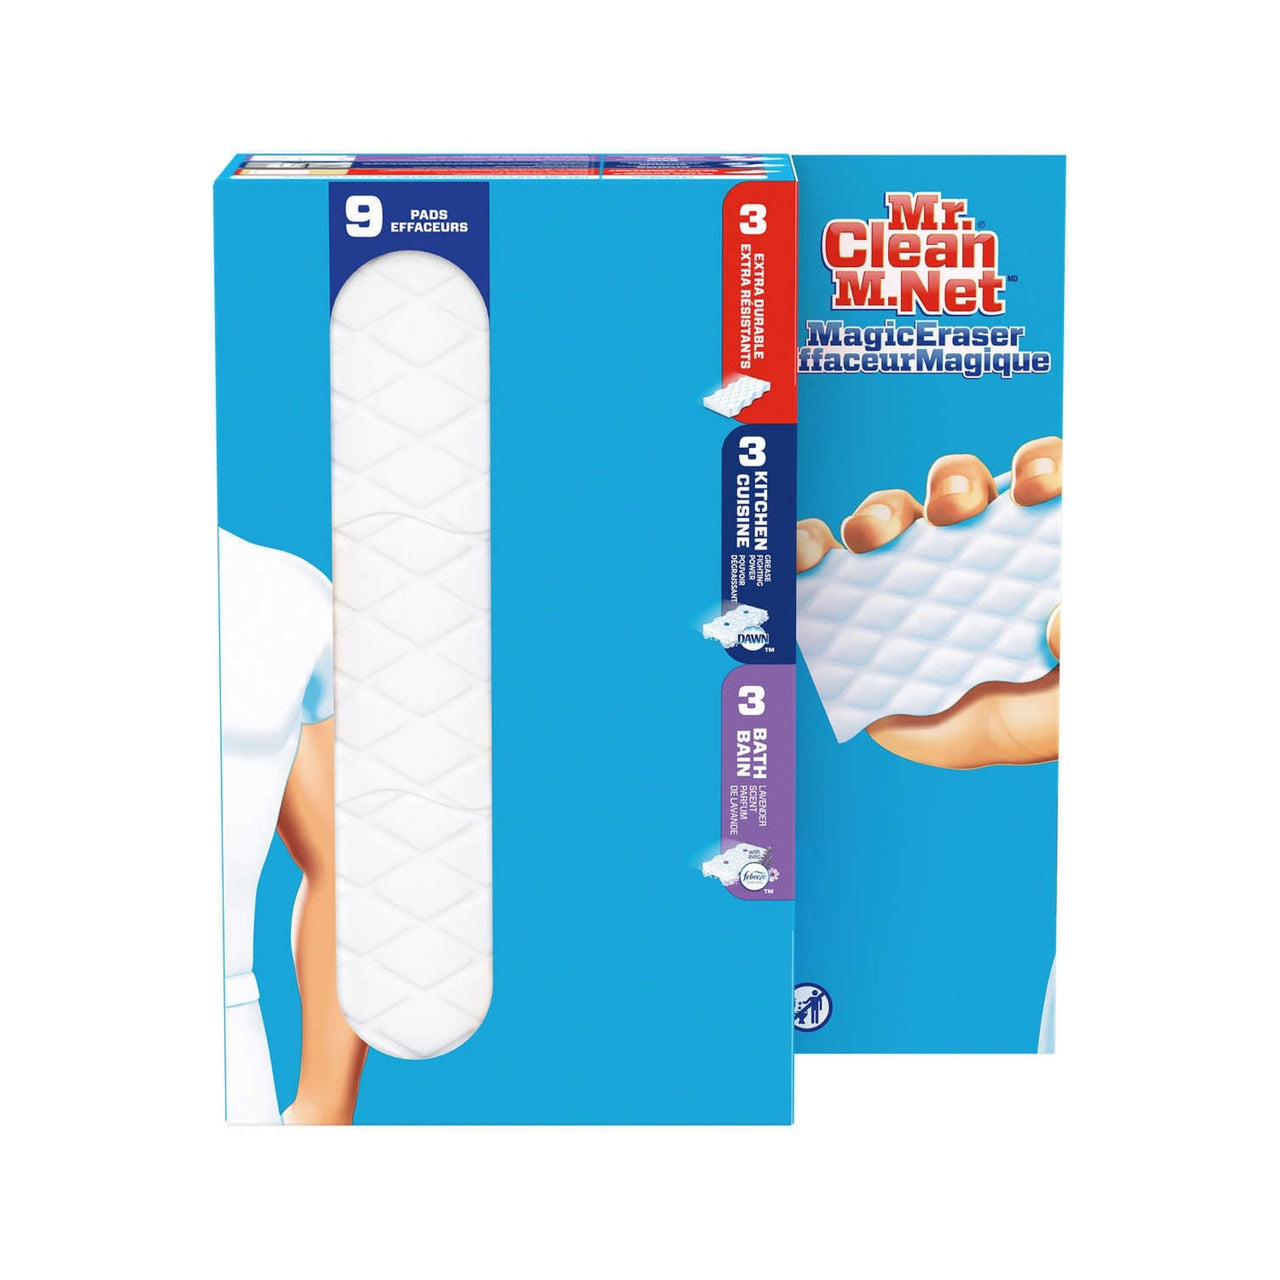 Image of Mr. Clean Magic Eraser Variety Pack, 9-count